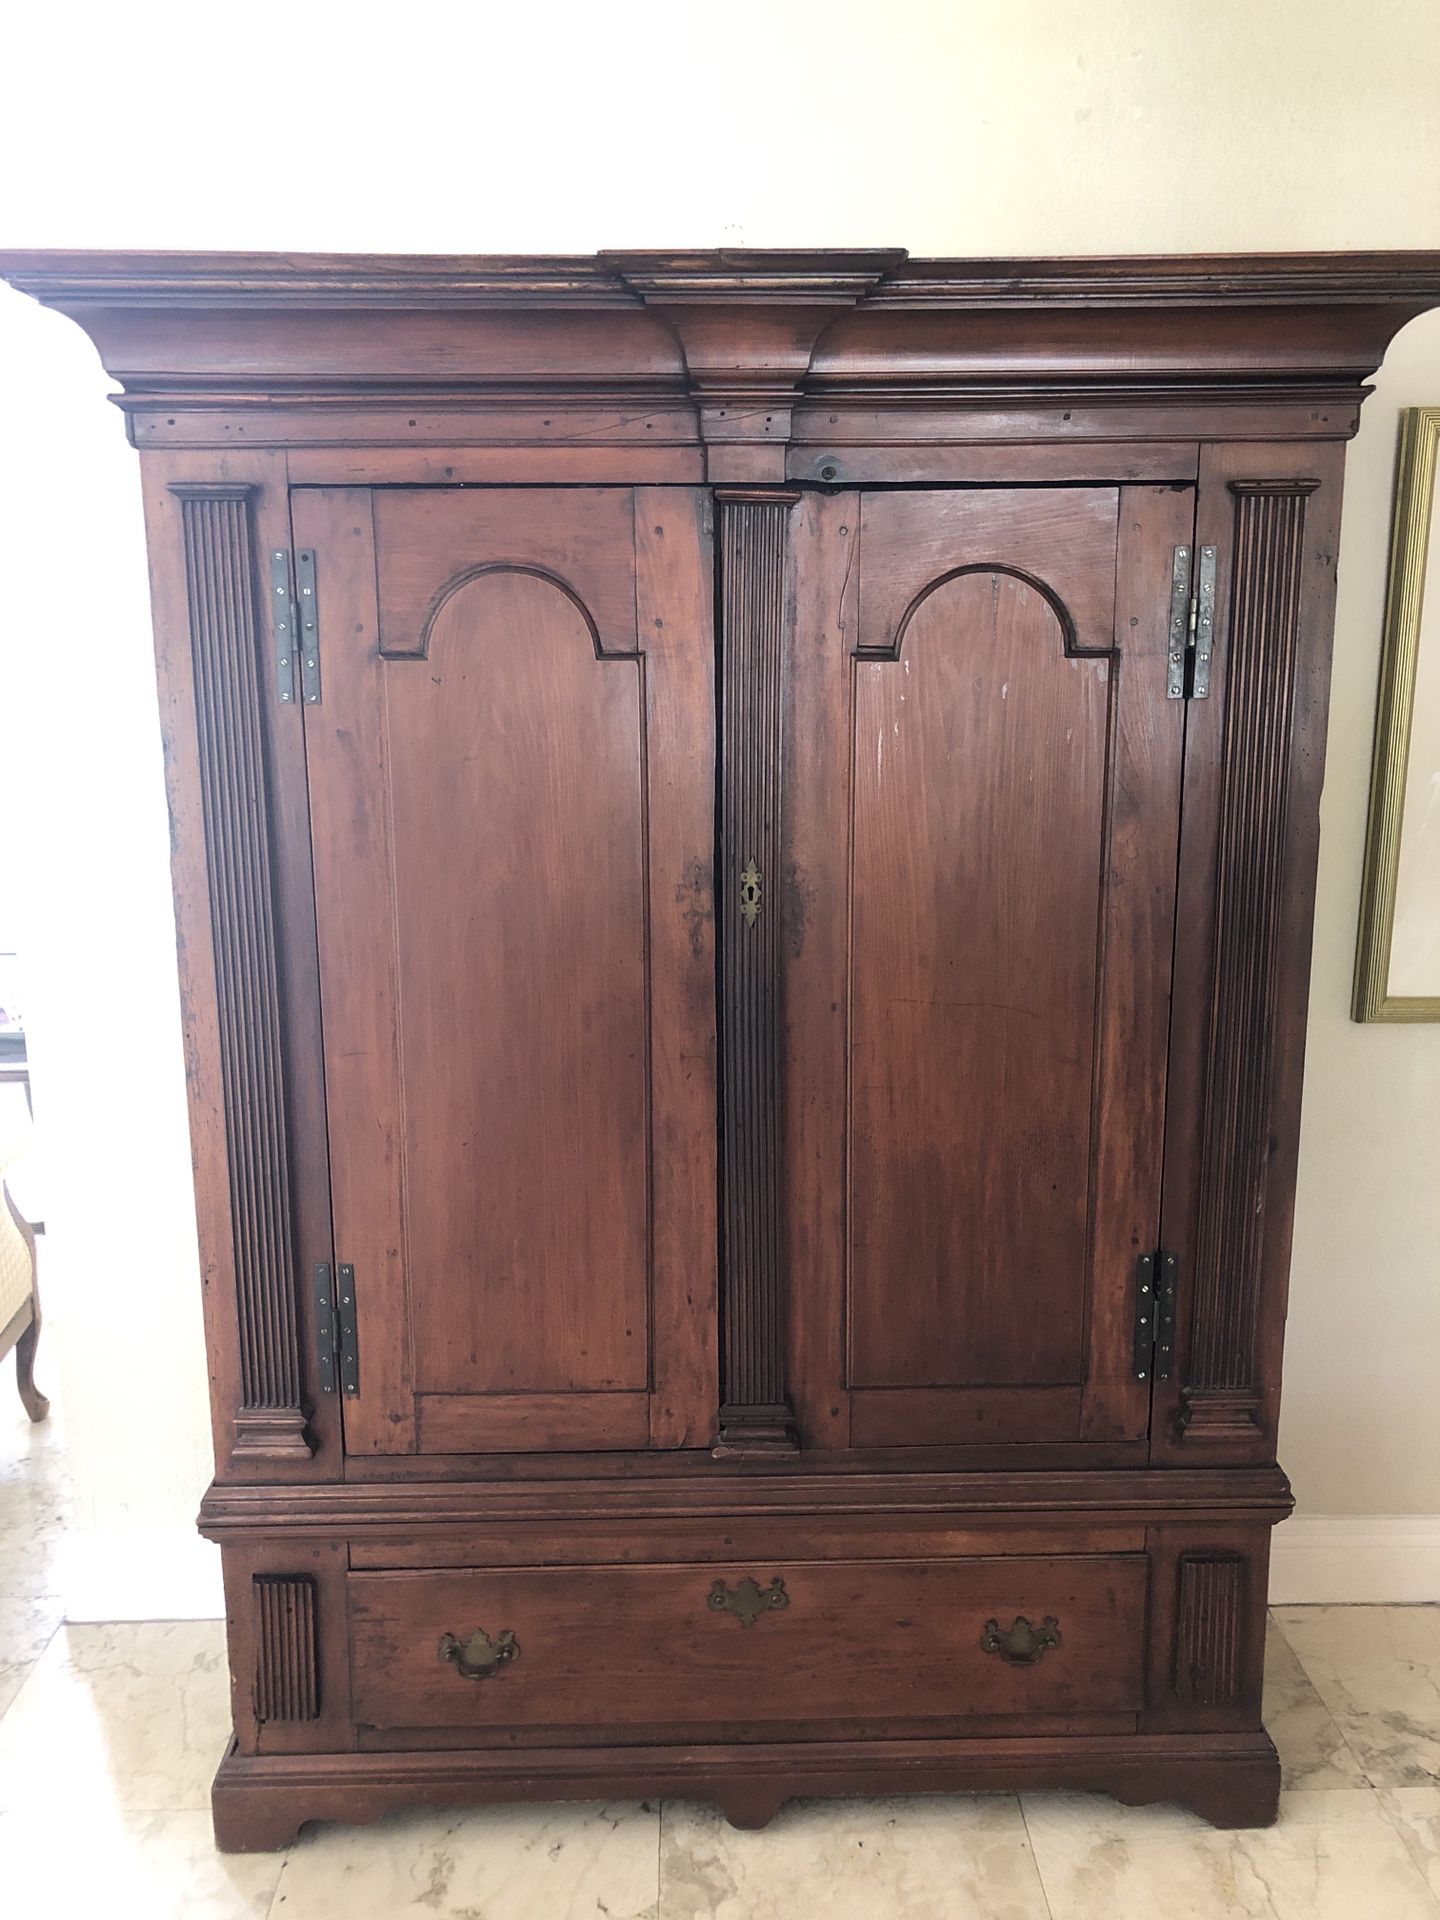 Armoire antique wooden with iron hinges gorgeous